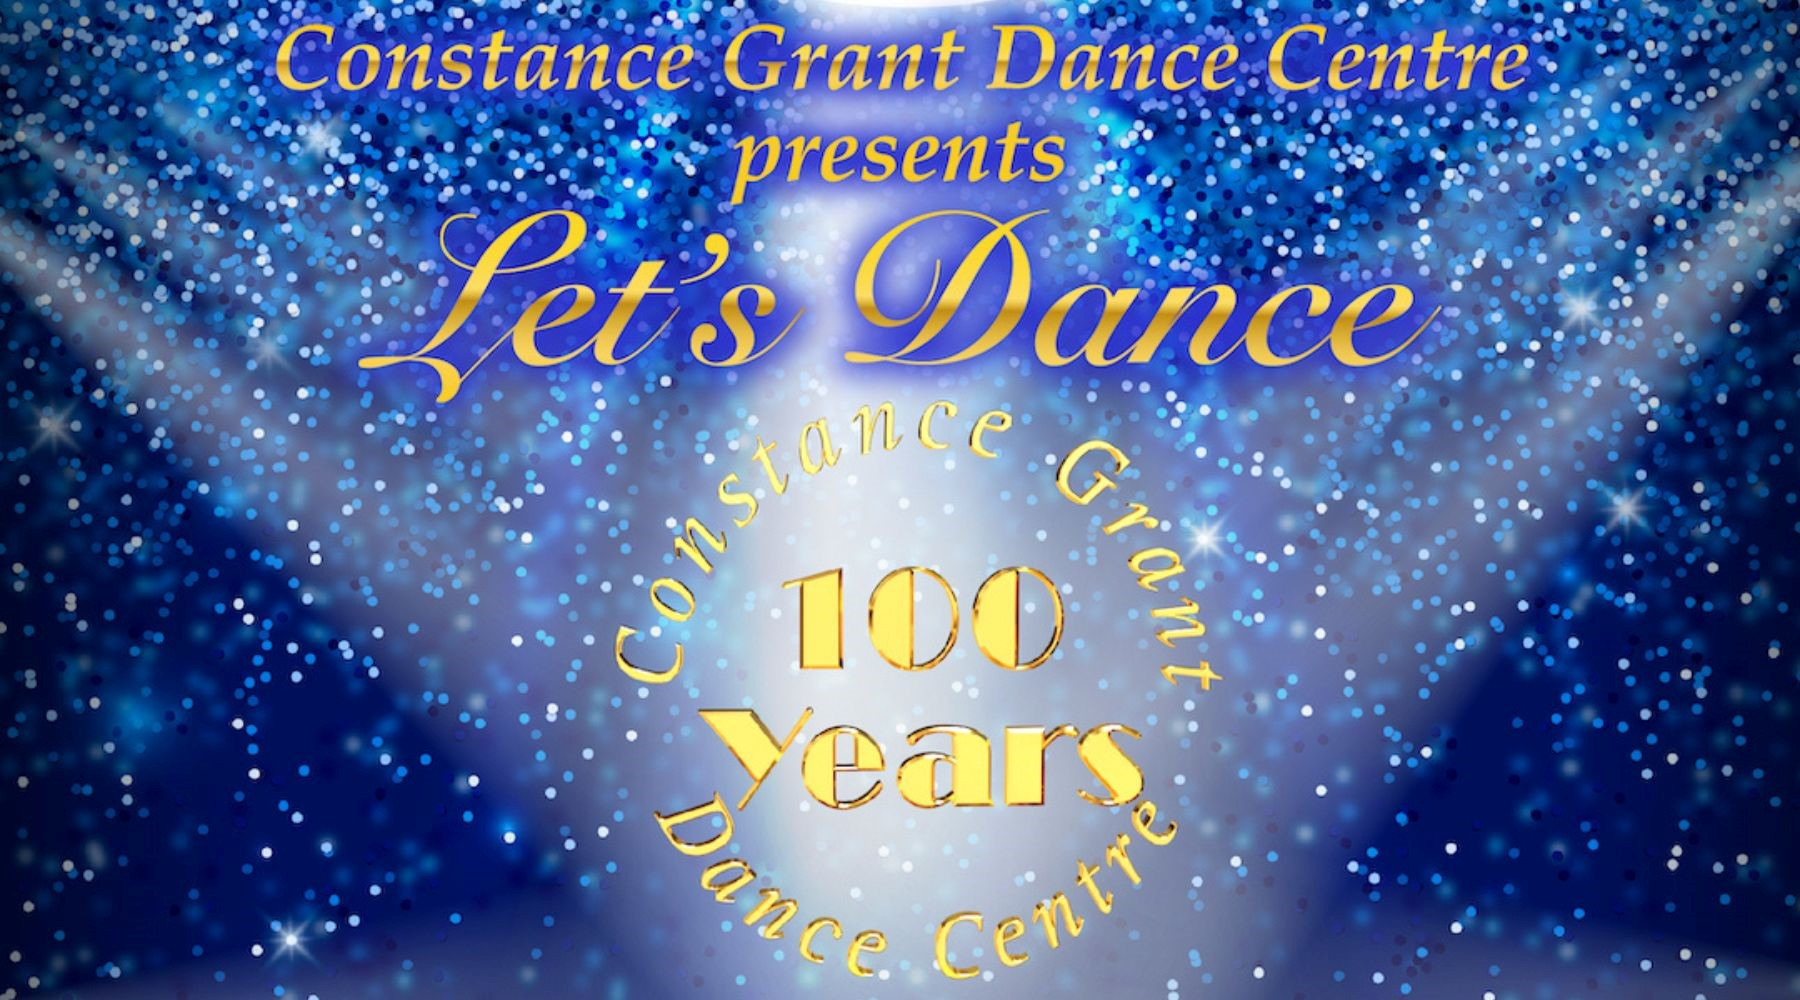 Image name Lets Dance 100 Years of CGDC at Sheffield City Hall Oval Hall Sheffield 1 the 5 image from the post Let's Dance - 100 Years of CGDC at Sheffield City Hall Oval Hall, Sheffield in Yorkshire.com.